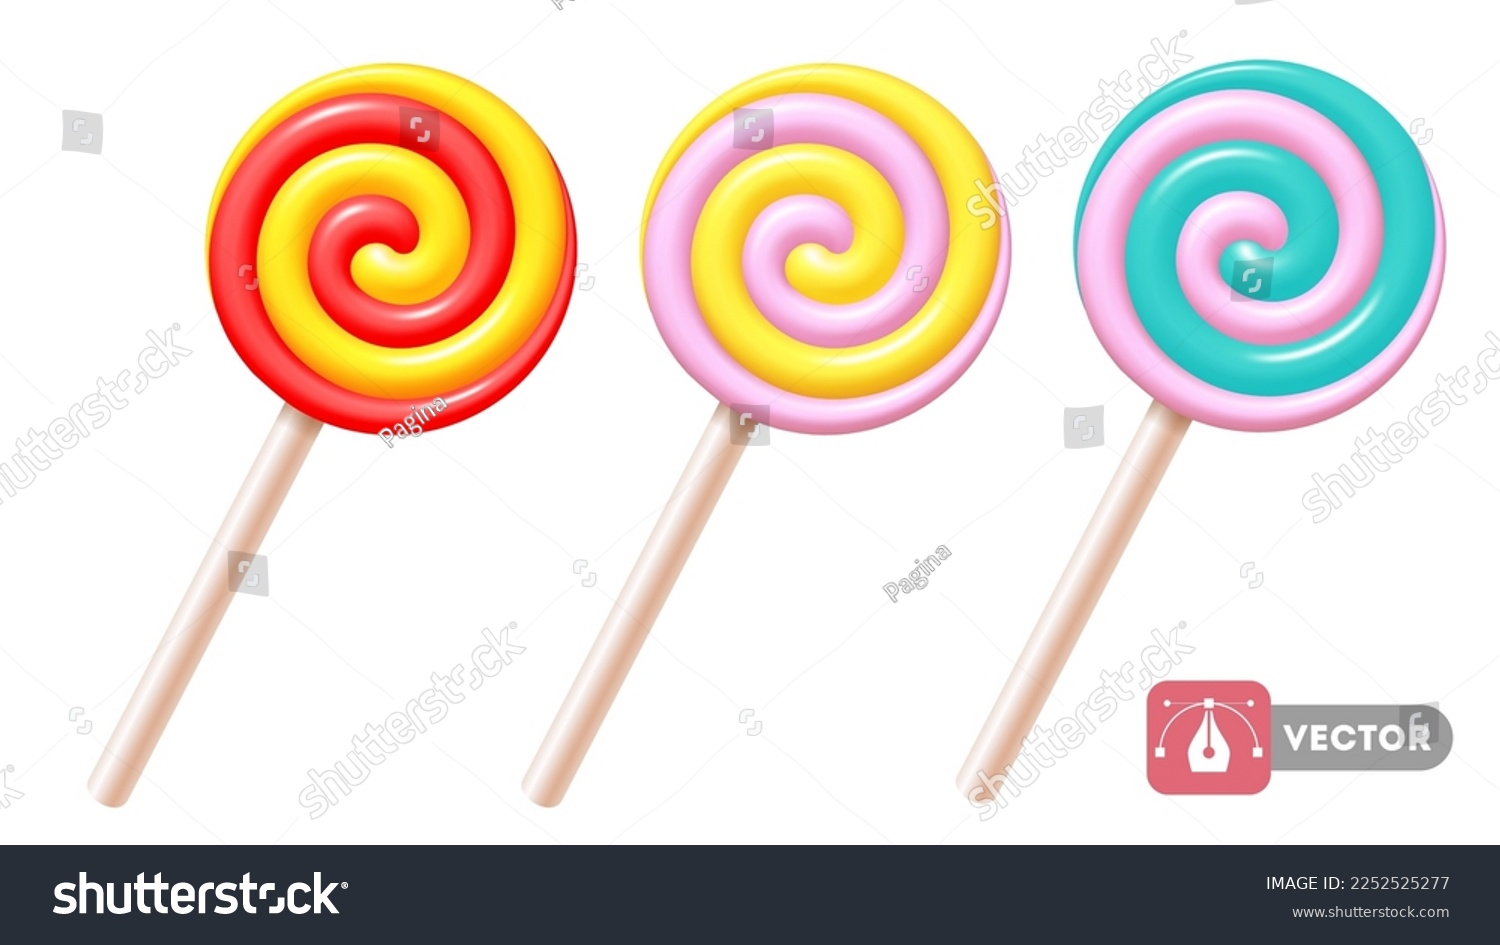 Set of sweet spiral lollipops on white plastic sticks. 3d realistic, swirl, colored sugar candies. Vector illustration EPS10 #2252525277